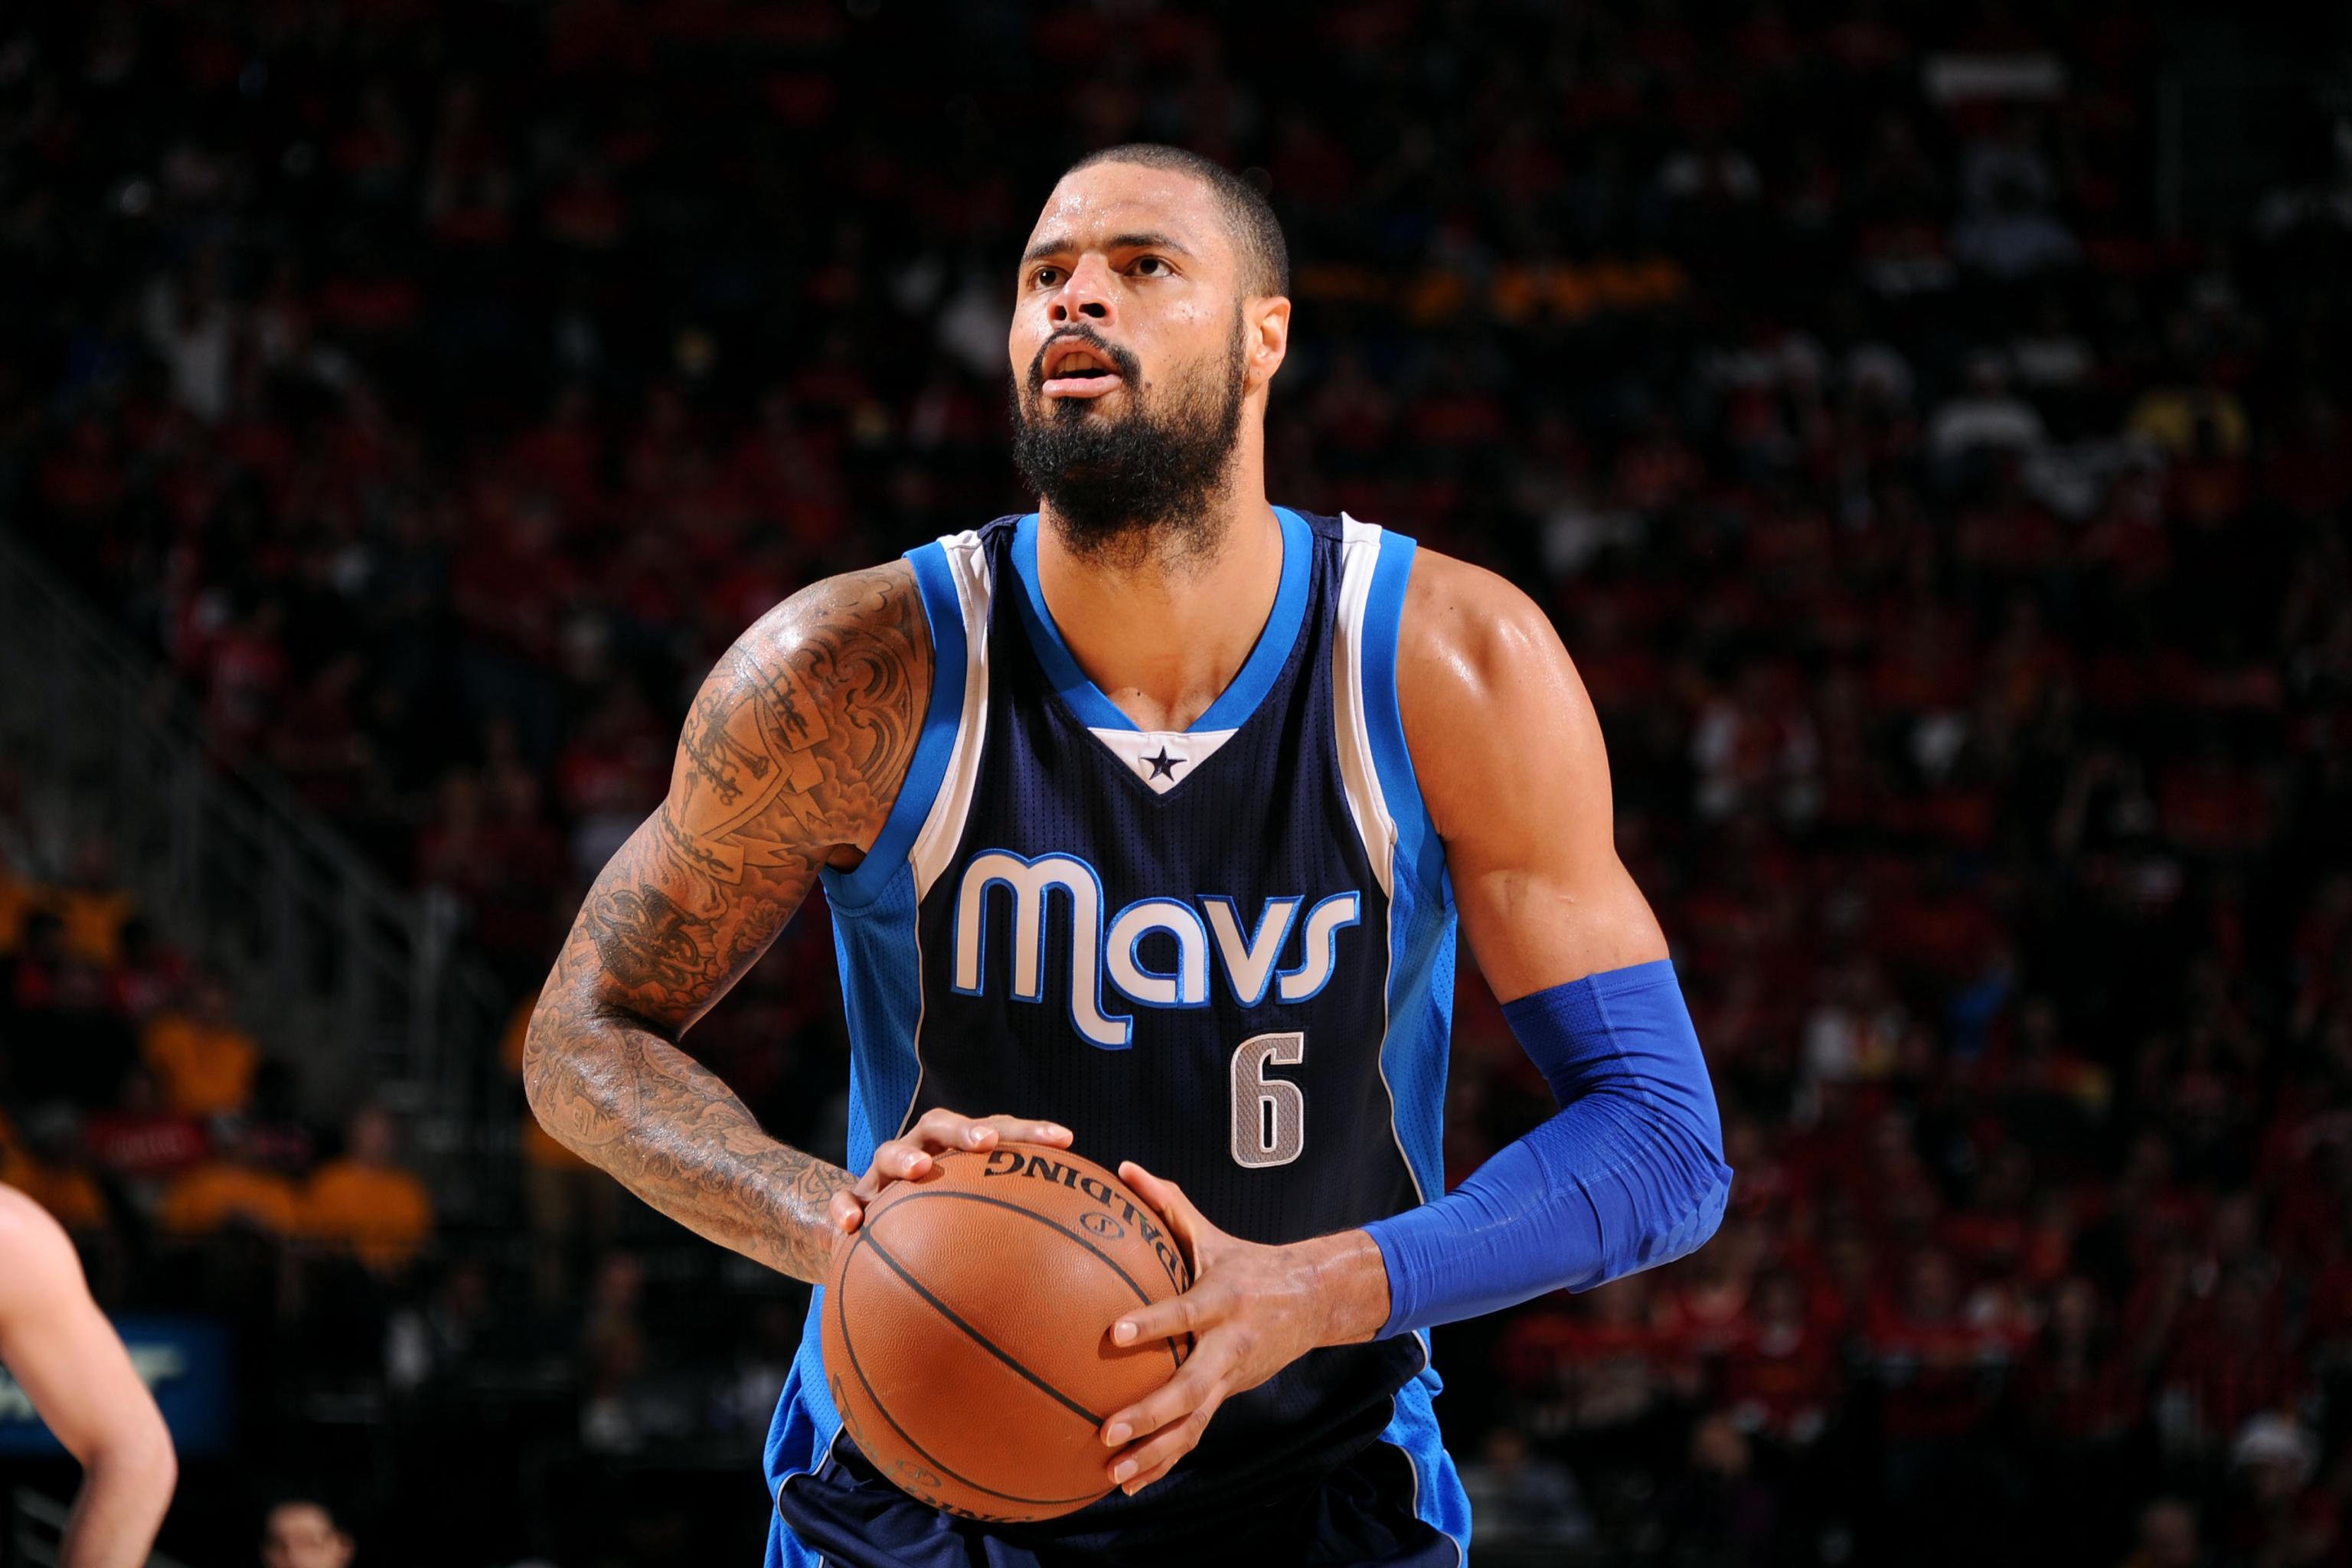 NBA on ESPN - Tyson Chandler is heading back to the Dallas